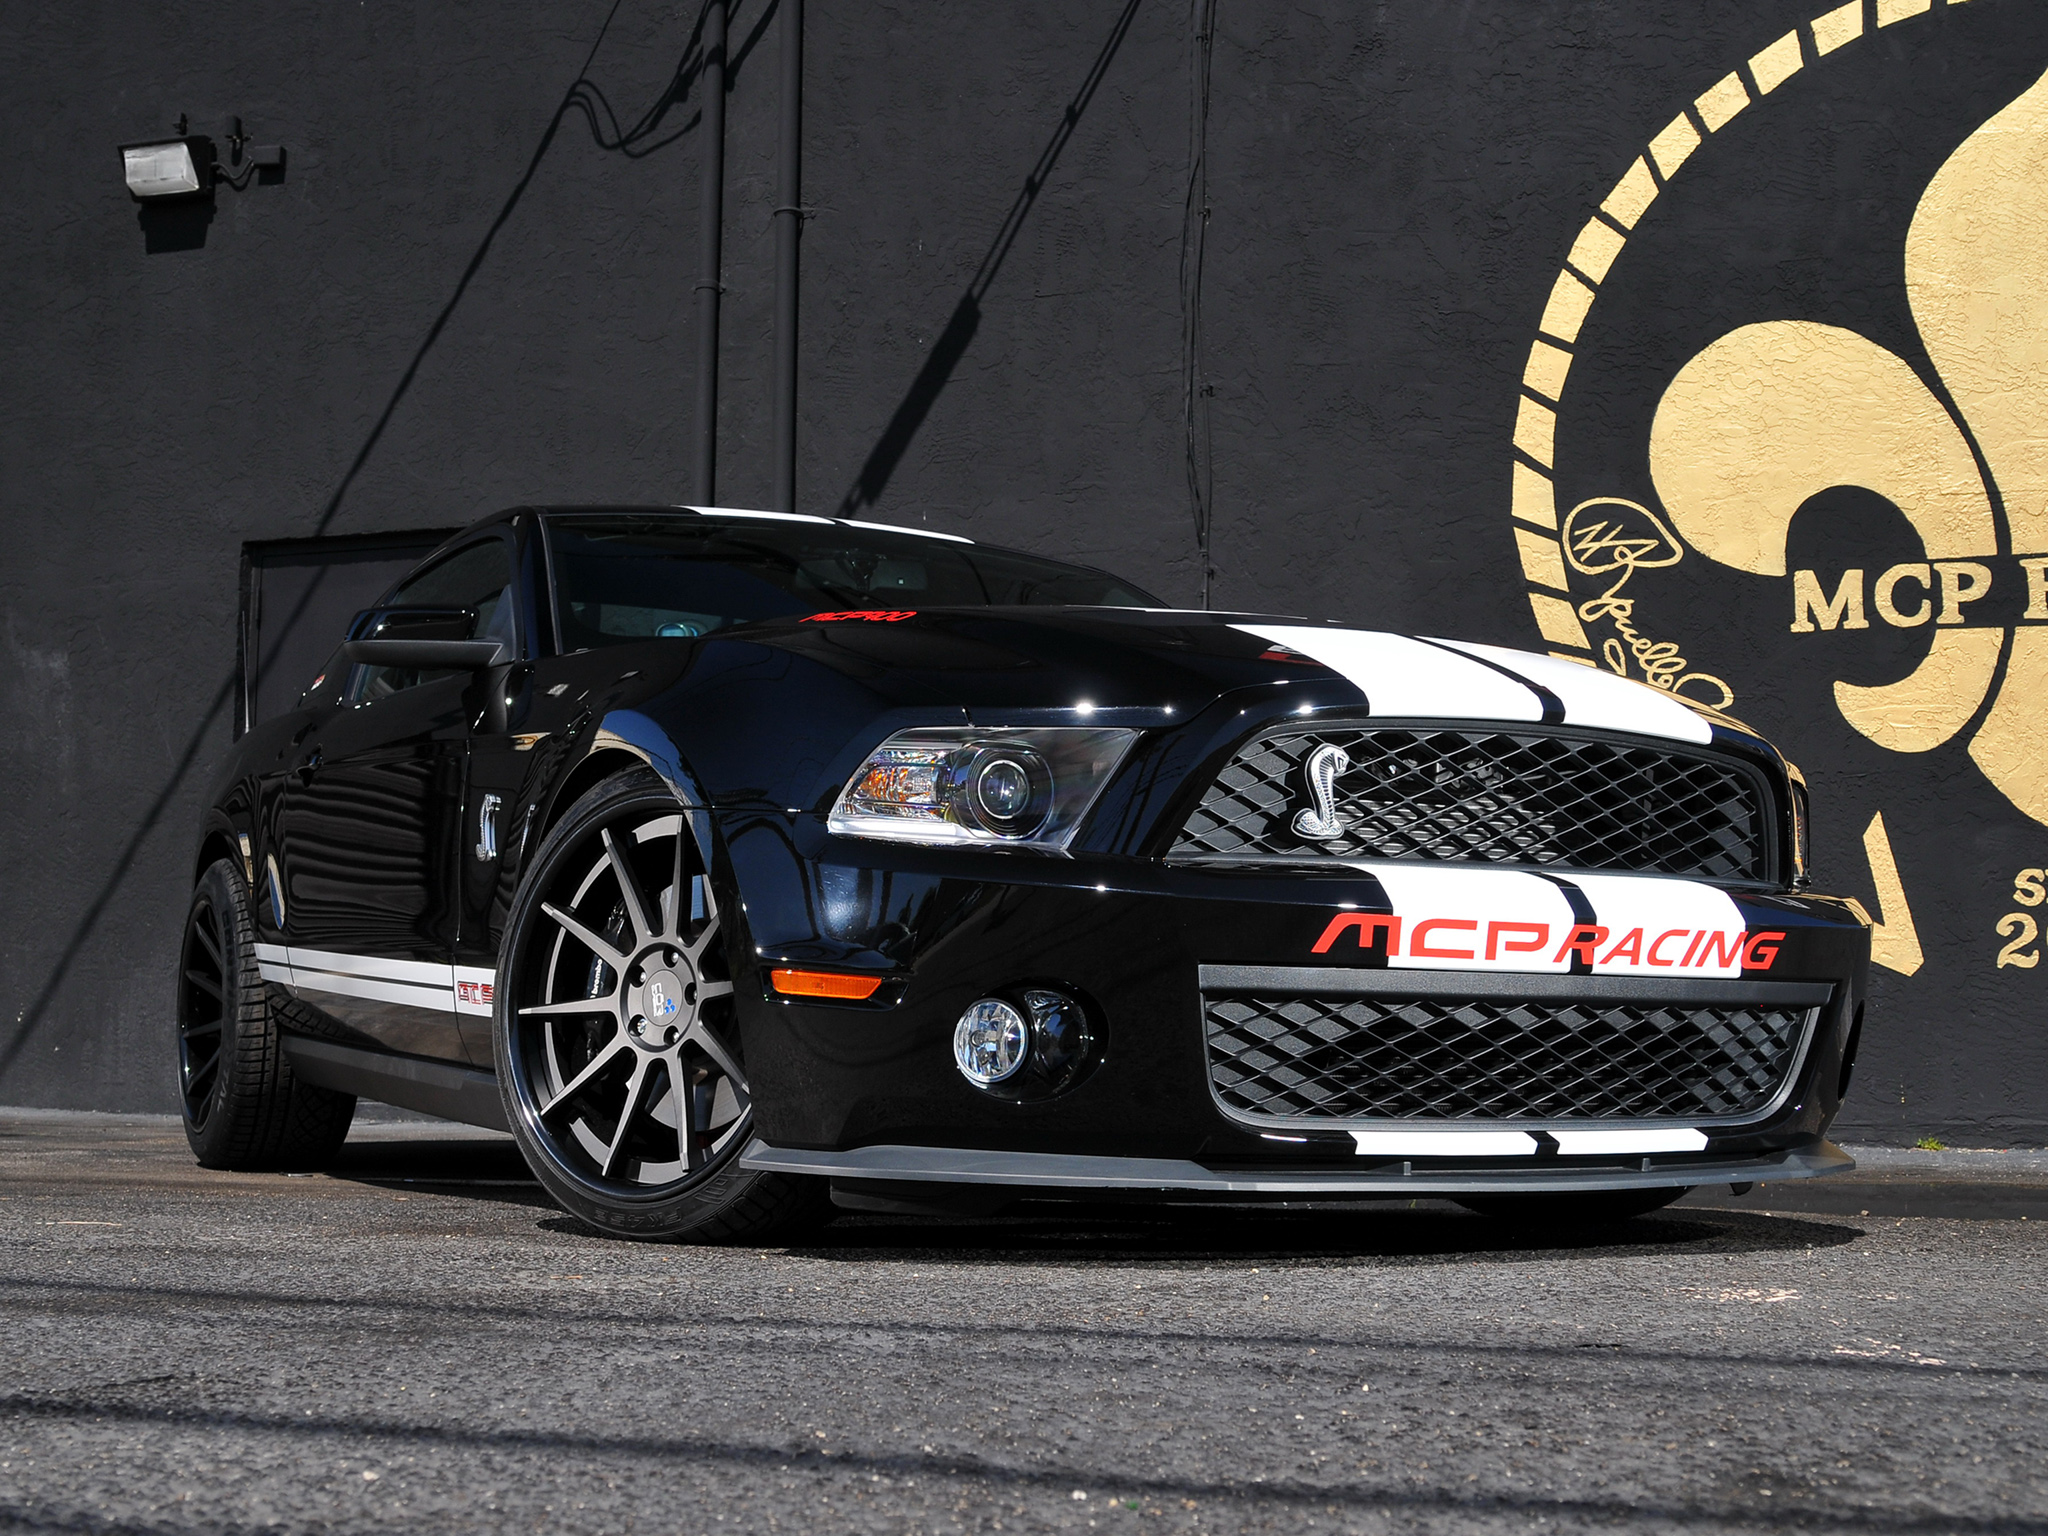 2010, Mcp racing, Shelby, Gt900, Ford, Mustang, Supercar, Supercars, Muscle Wallpaper